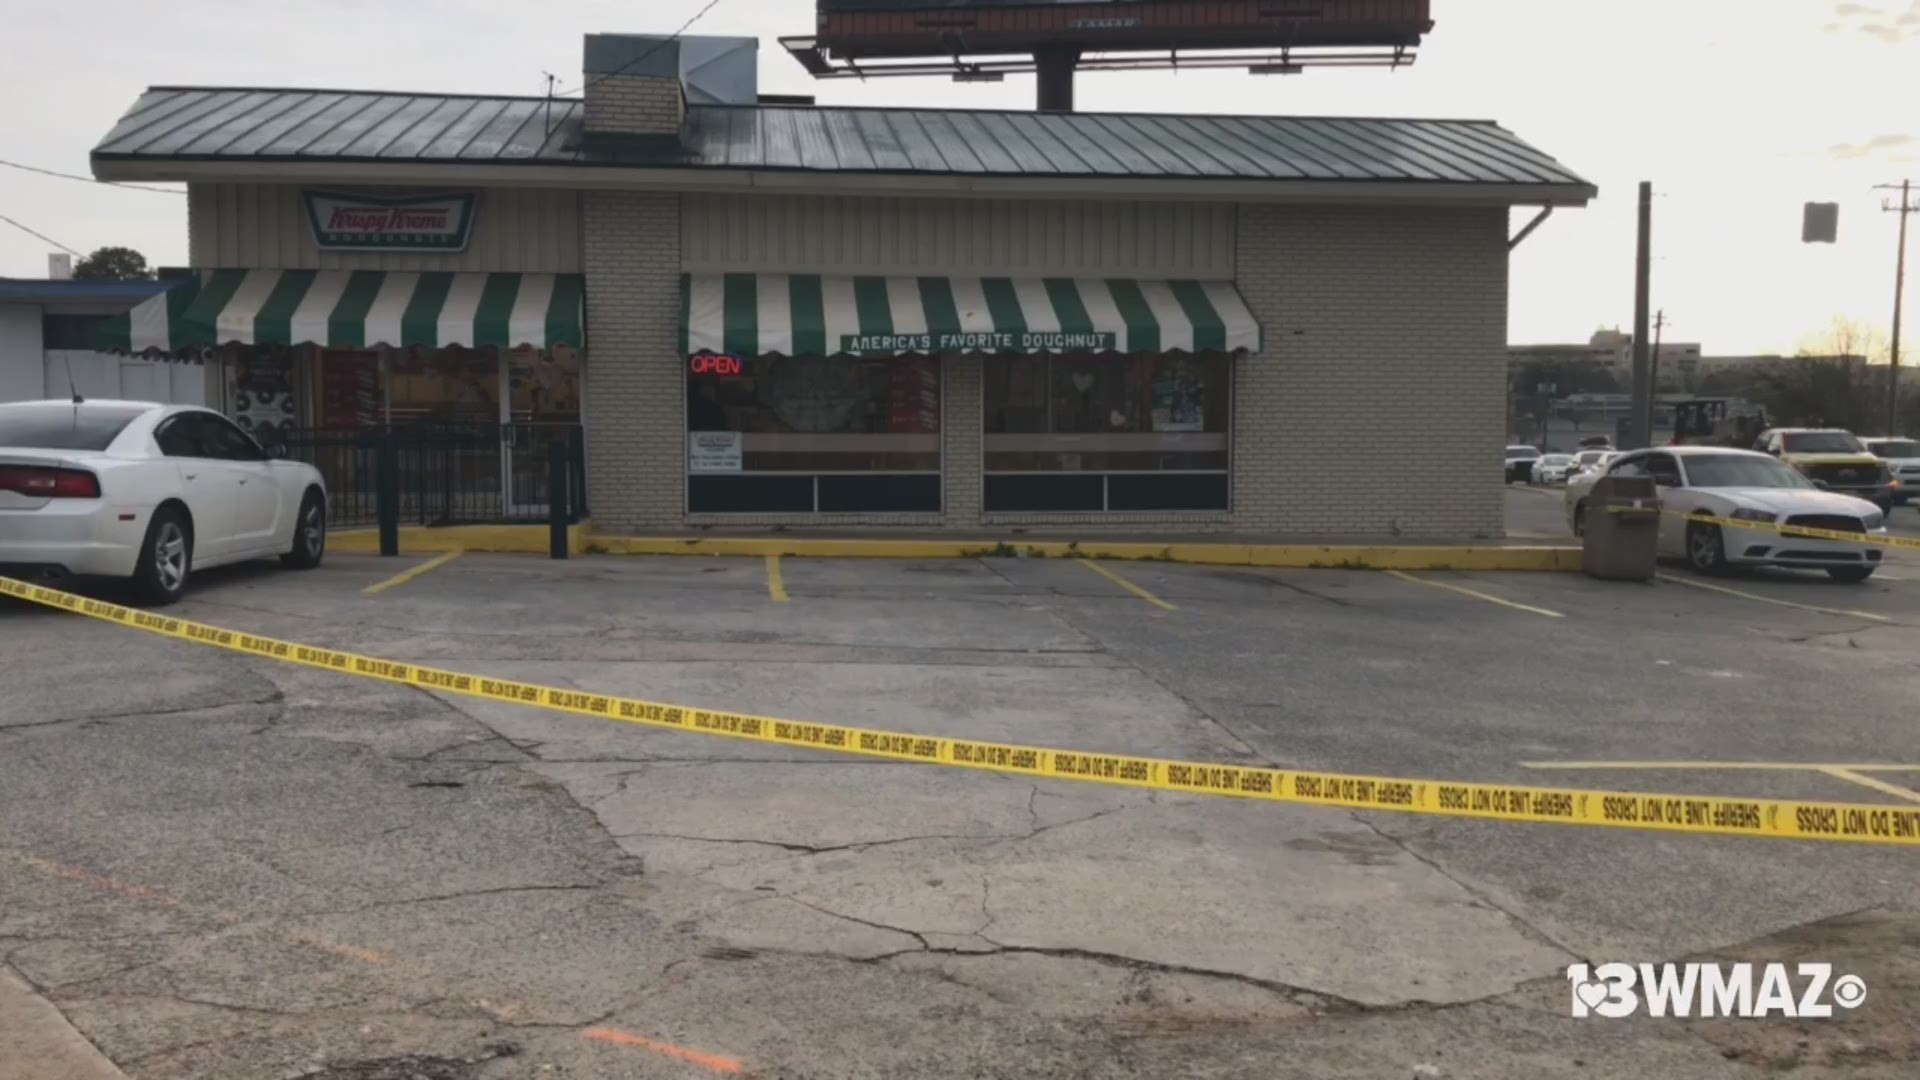 A 31-year-old Krispy Kreme cashier is recovering in the hospital after being physically assaulted during a robbery Monday morning.